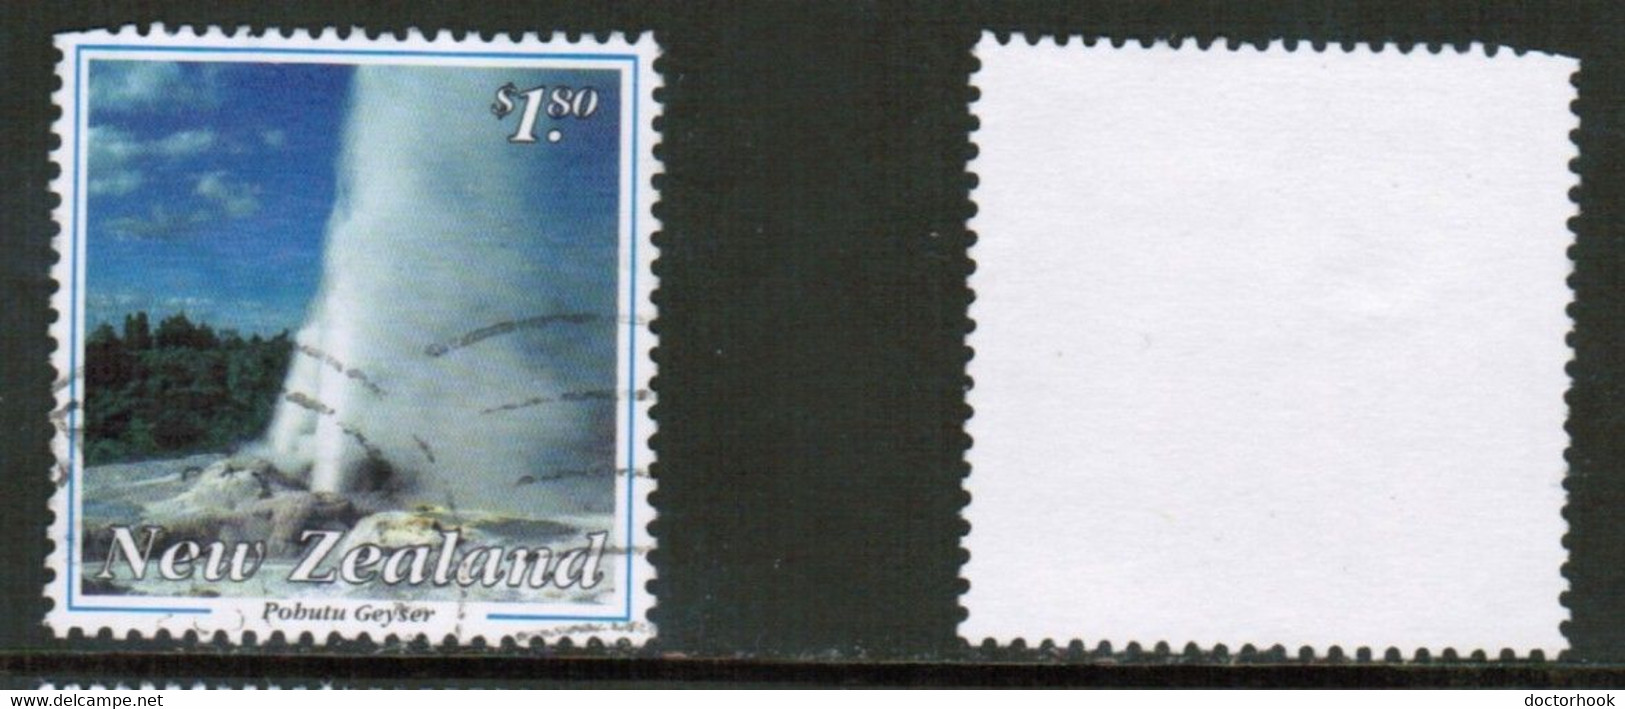 NEW ZEALAND  Scott # 1160 USED (CONDITION AS PER SCAN) (WW-1-72) - Used Stamps